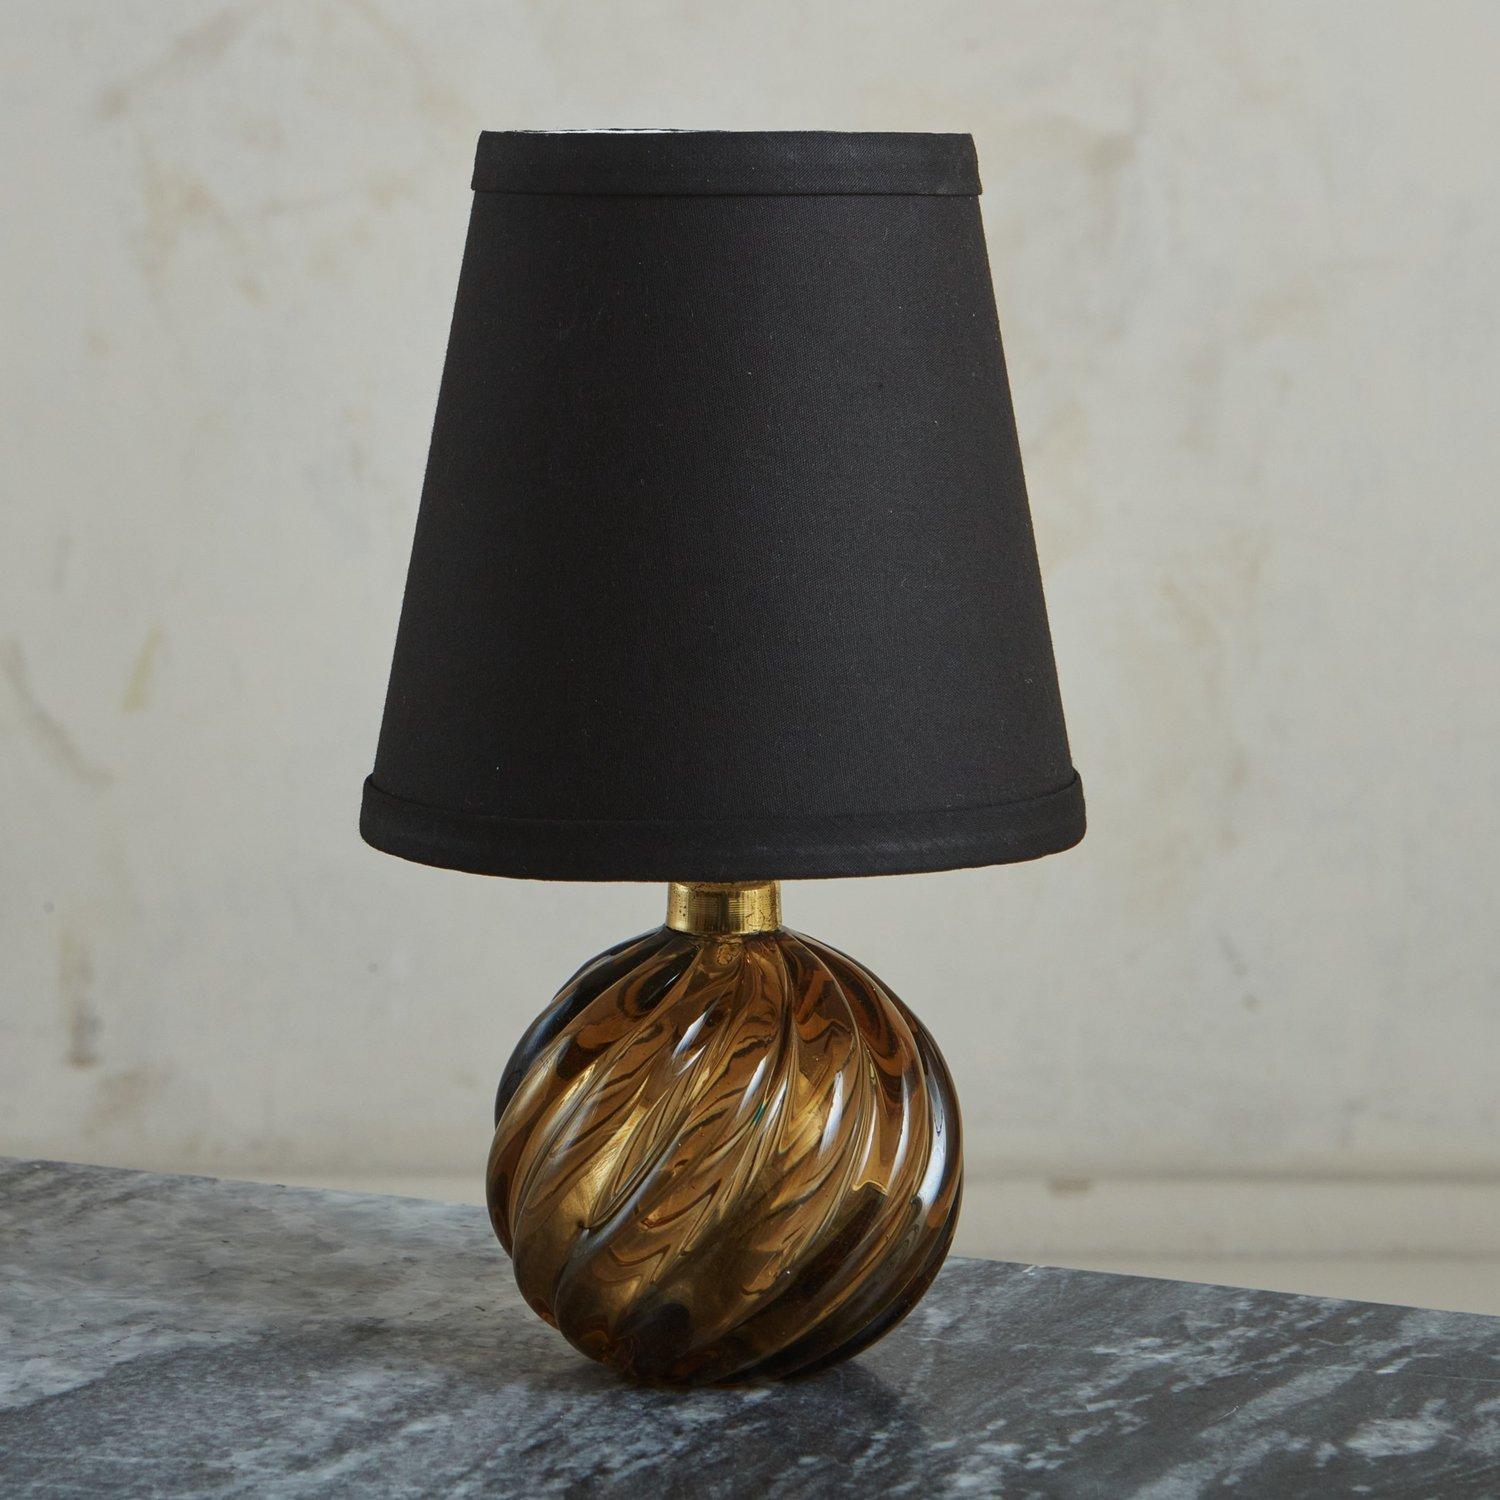 A petite 1930s Italian table lamp by Paolo Venini featuring an amber cased glass body with a brass trim. This lamp includes a new black fabric shade. Acid etched ‘Venini Murano’ stamp on base. Sourced in Italy, 1930s.

DIMENSIONS: 3.75